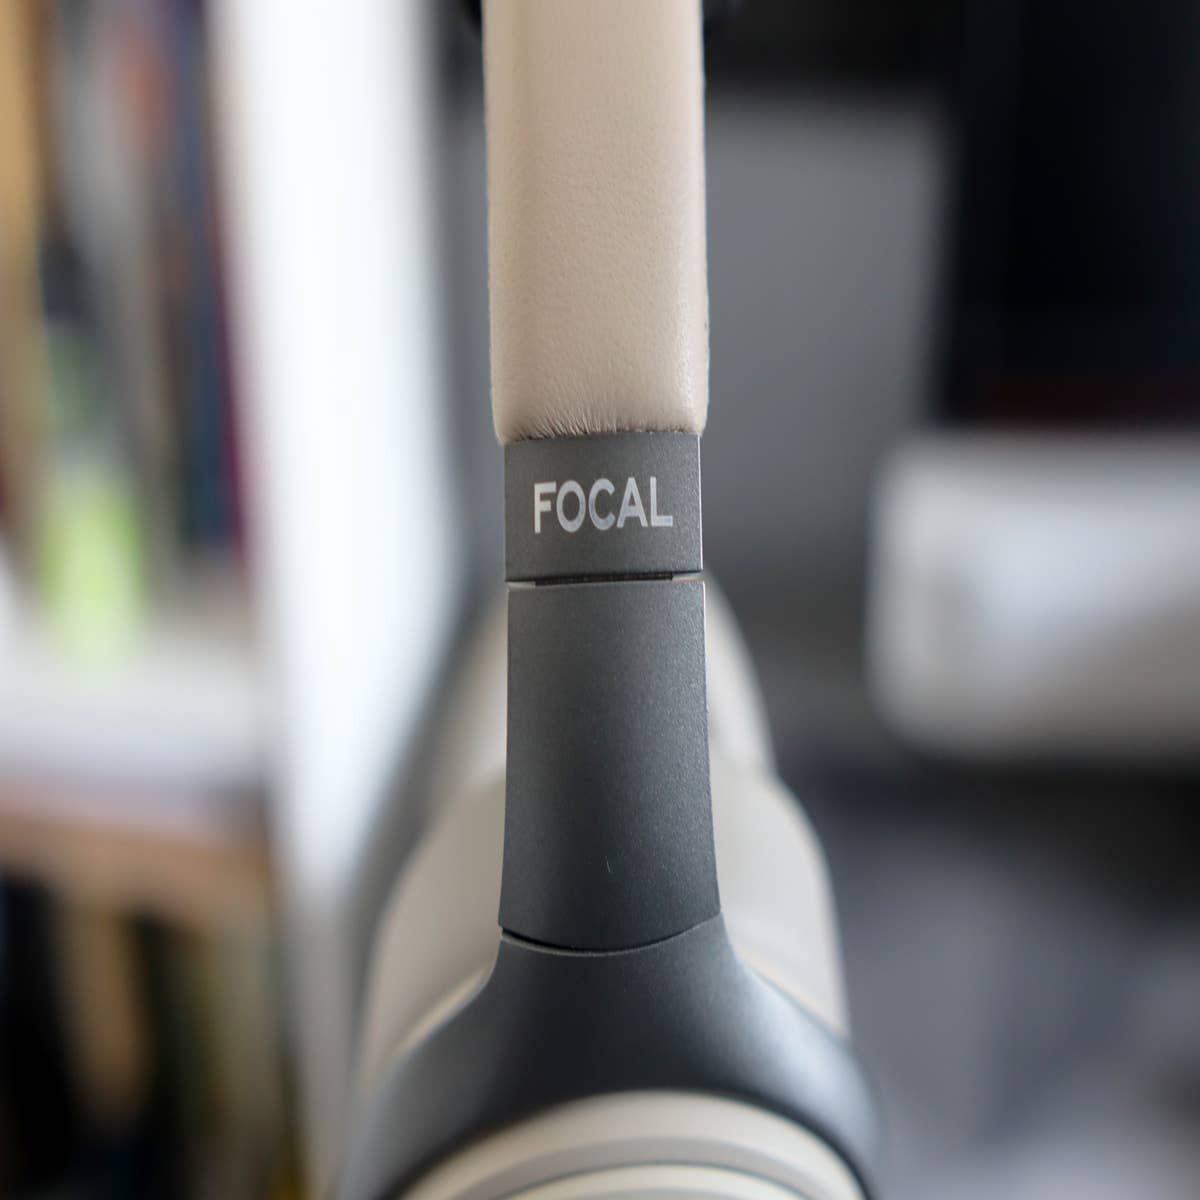 Focal Bathys Headphones: Now Available In Dune Color With New